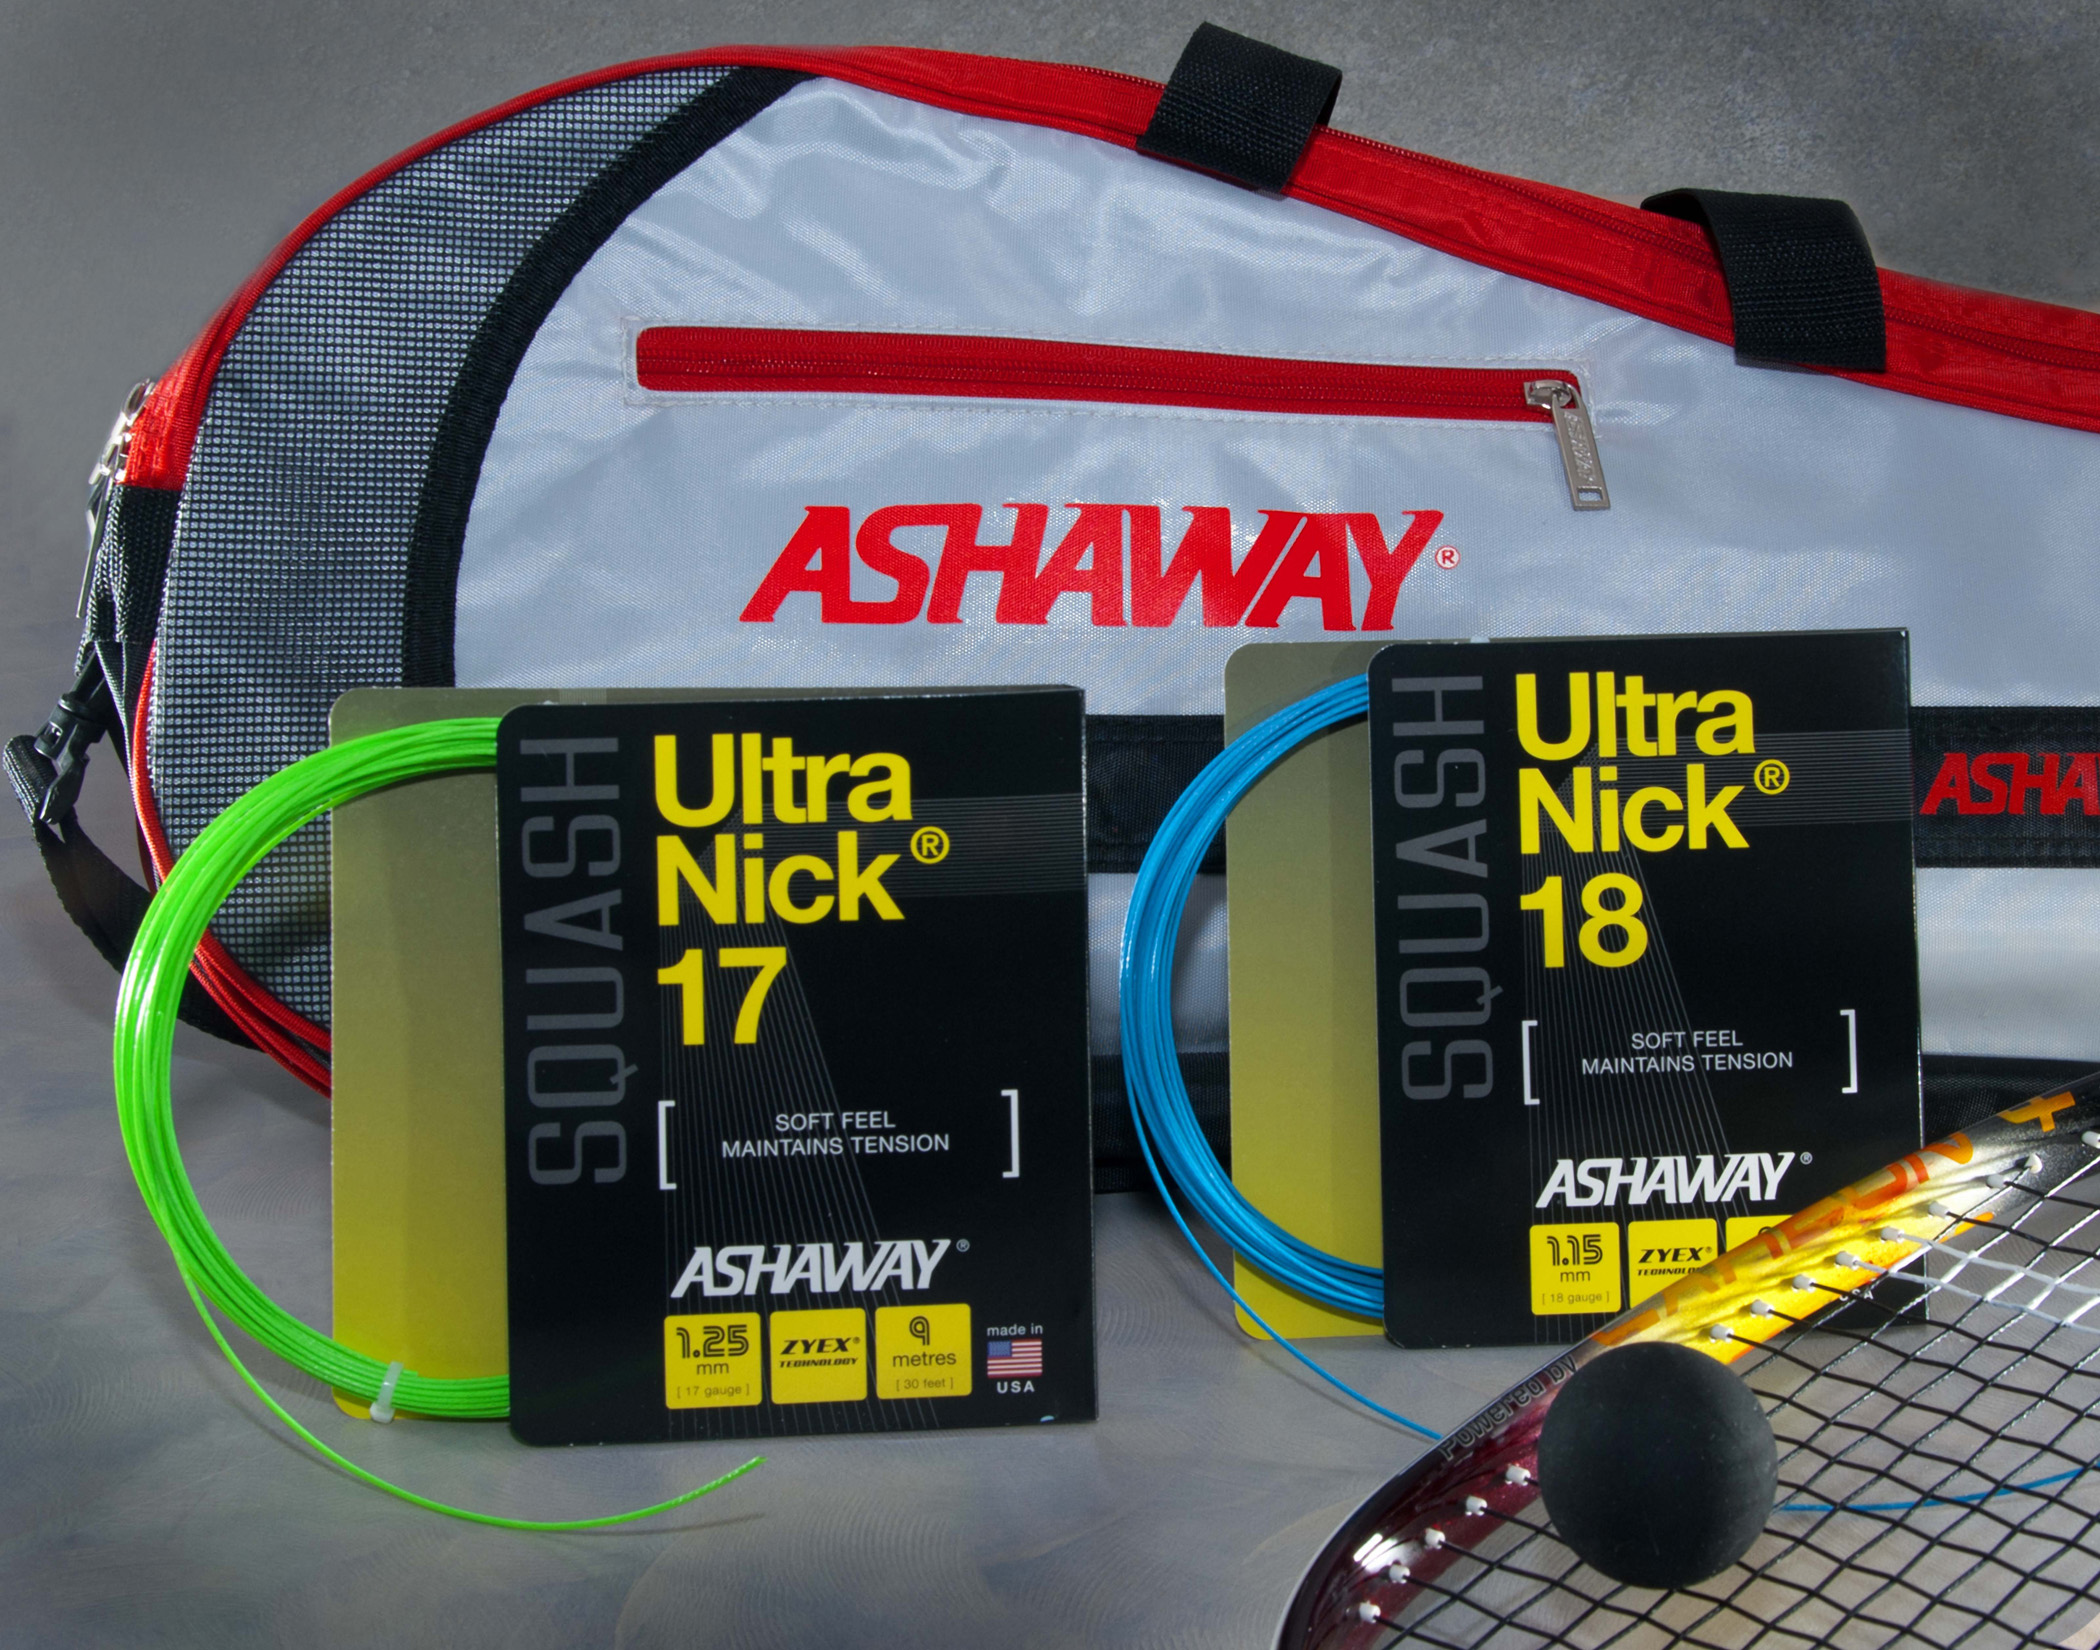 Ashaway’s UltraNick, in contrast, uses a more traditional multifilament core and is designed to give and stretch a bit before rebounding—making for a “softer” feel.